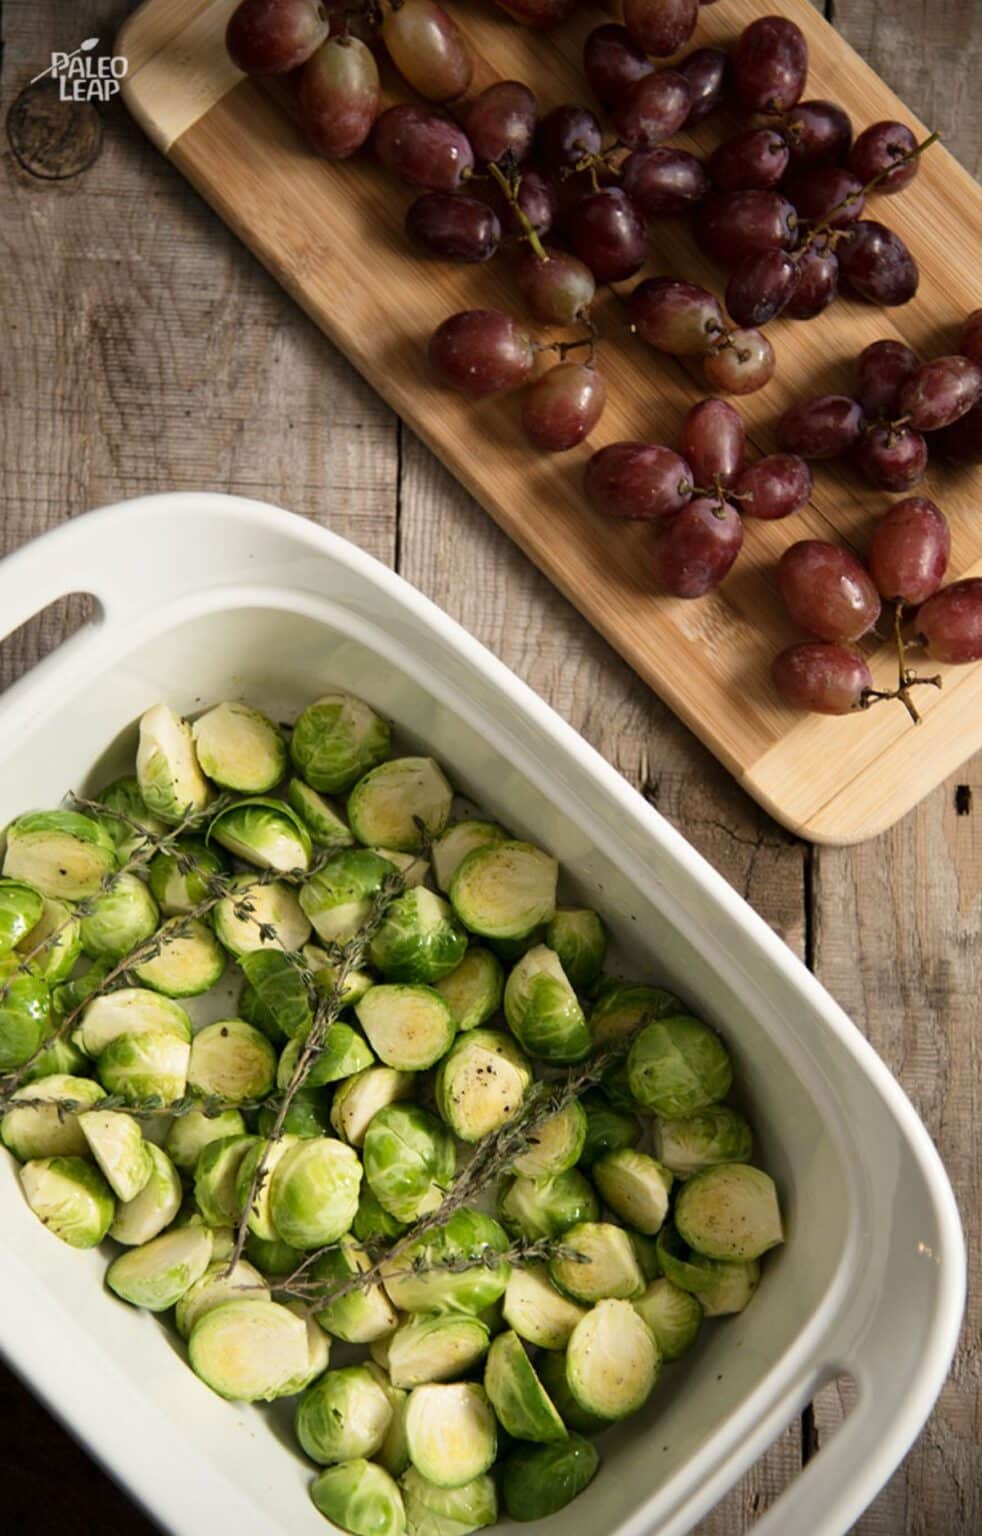 Roasted Brussels Sprouts with Grapes Recipe | Paleo Leap